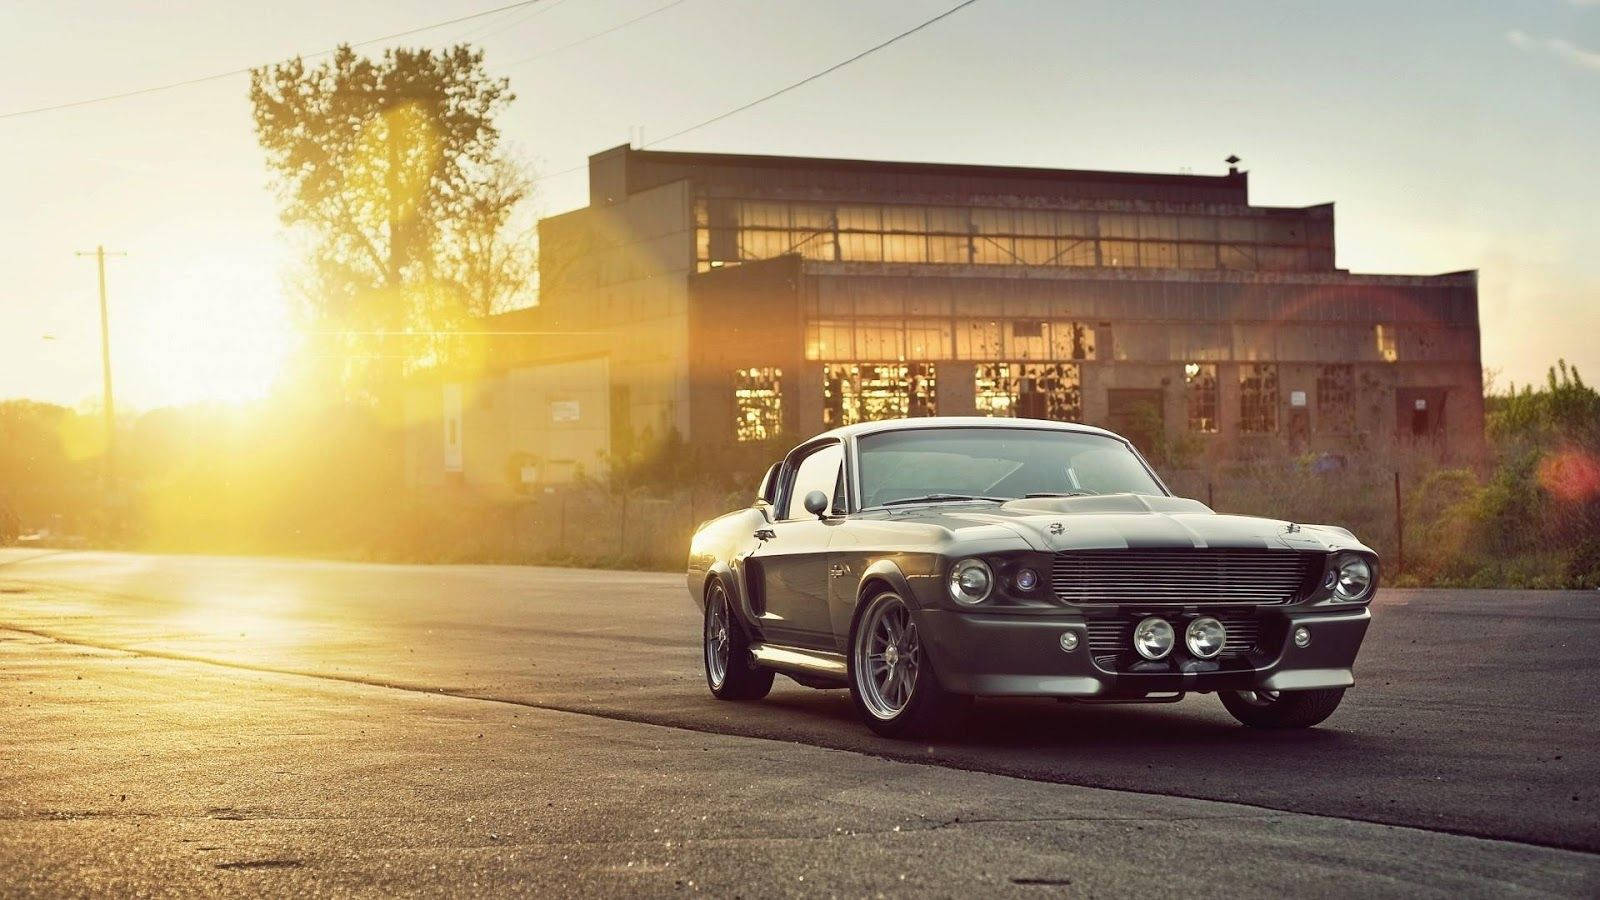 Majestic Shelby Mustang Muscle Car at Sunset Wallpaper